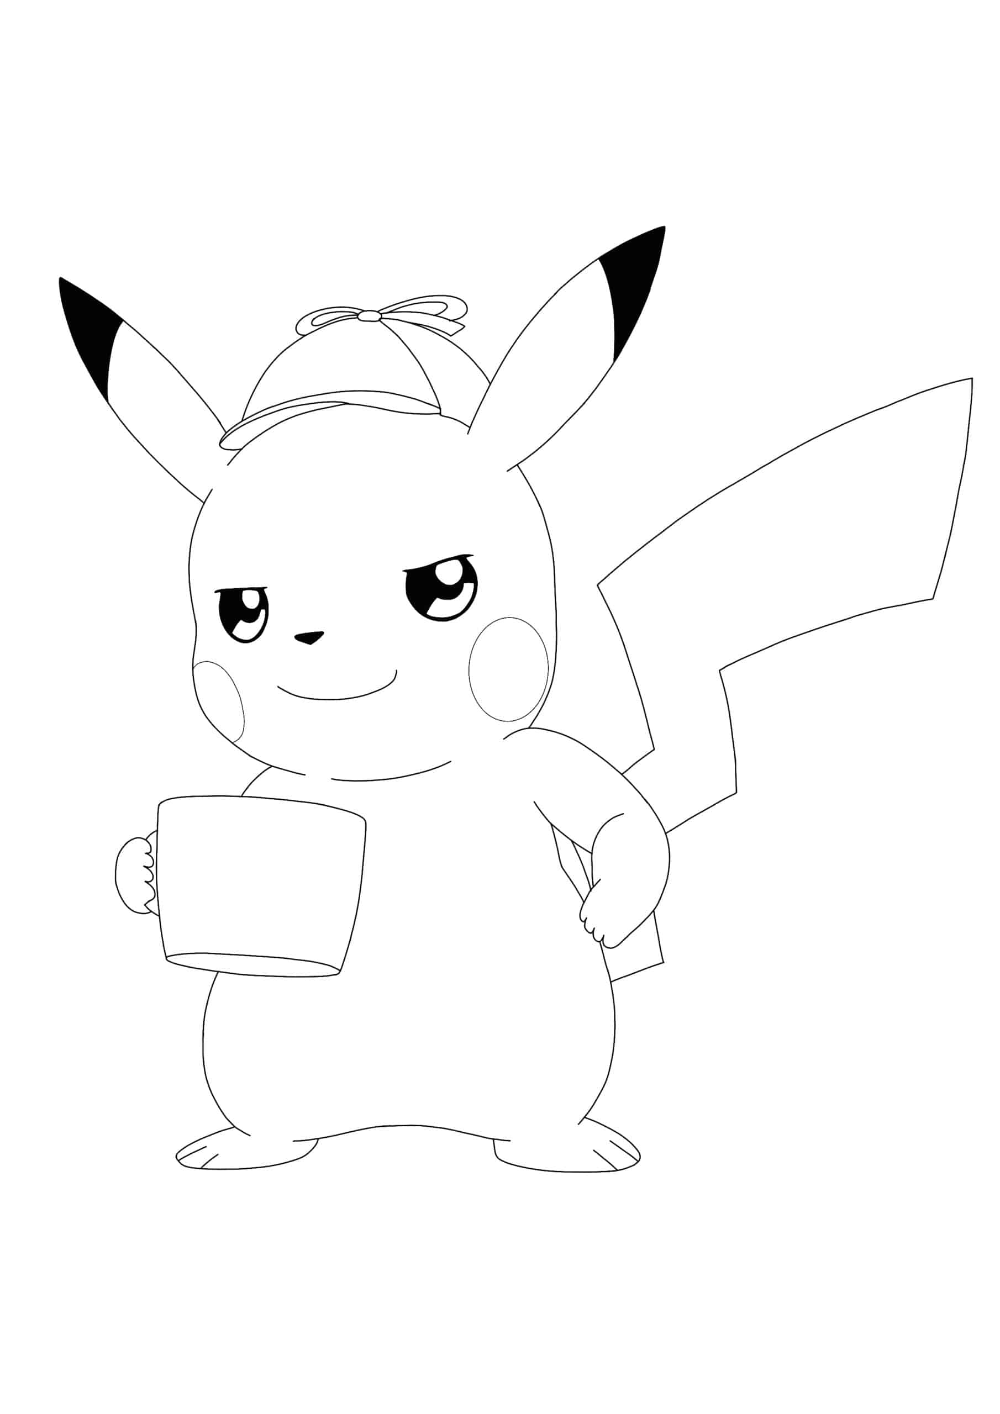 Detective pikachu drinks coffee coloring pages